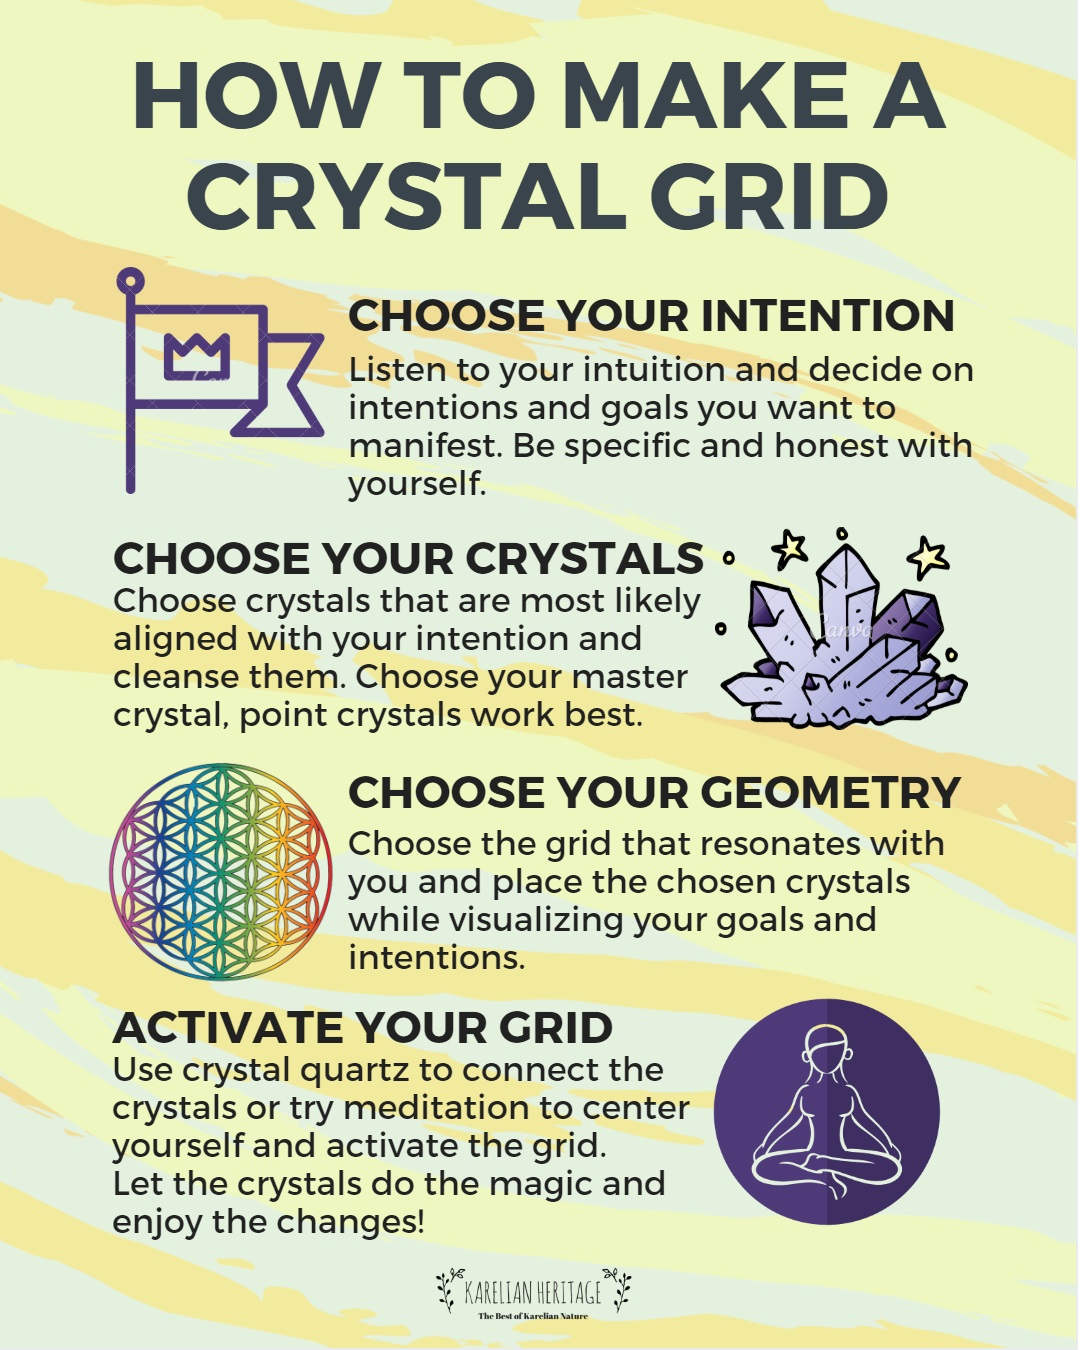 shungite-crystal-grids-how-to-make-a-crystal-grid-for-healing